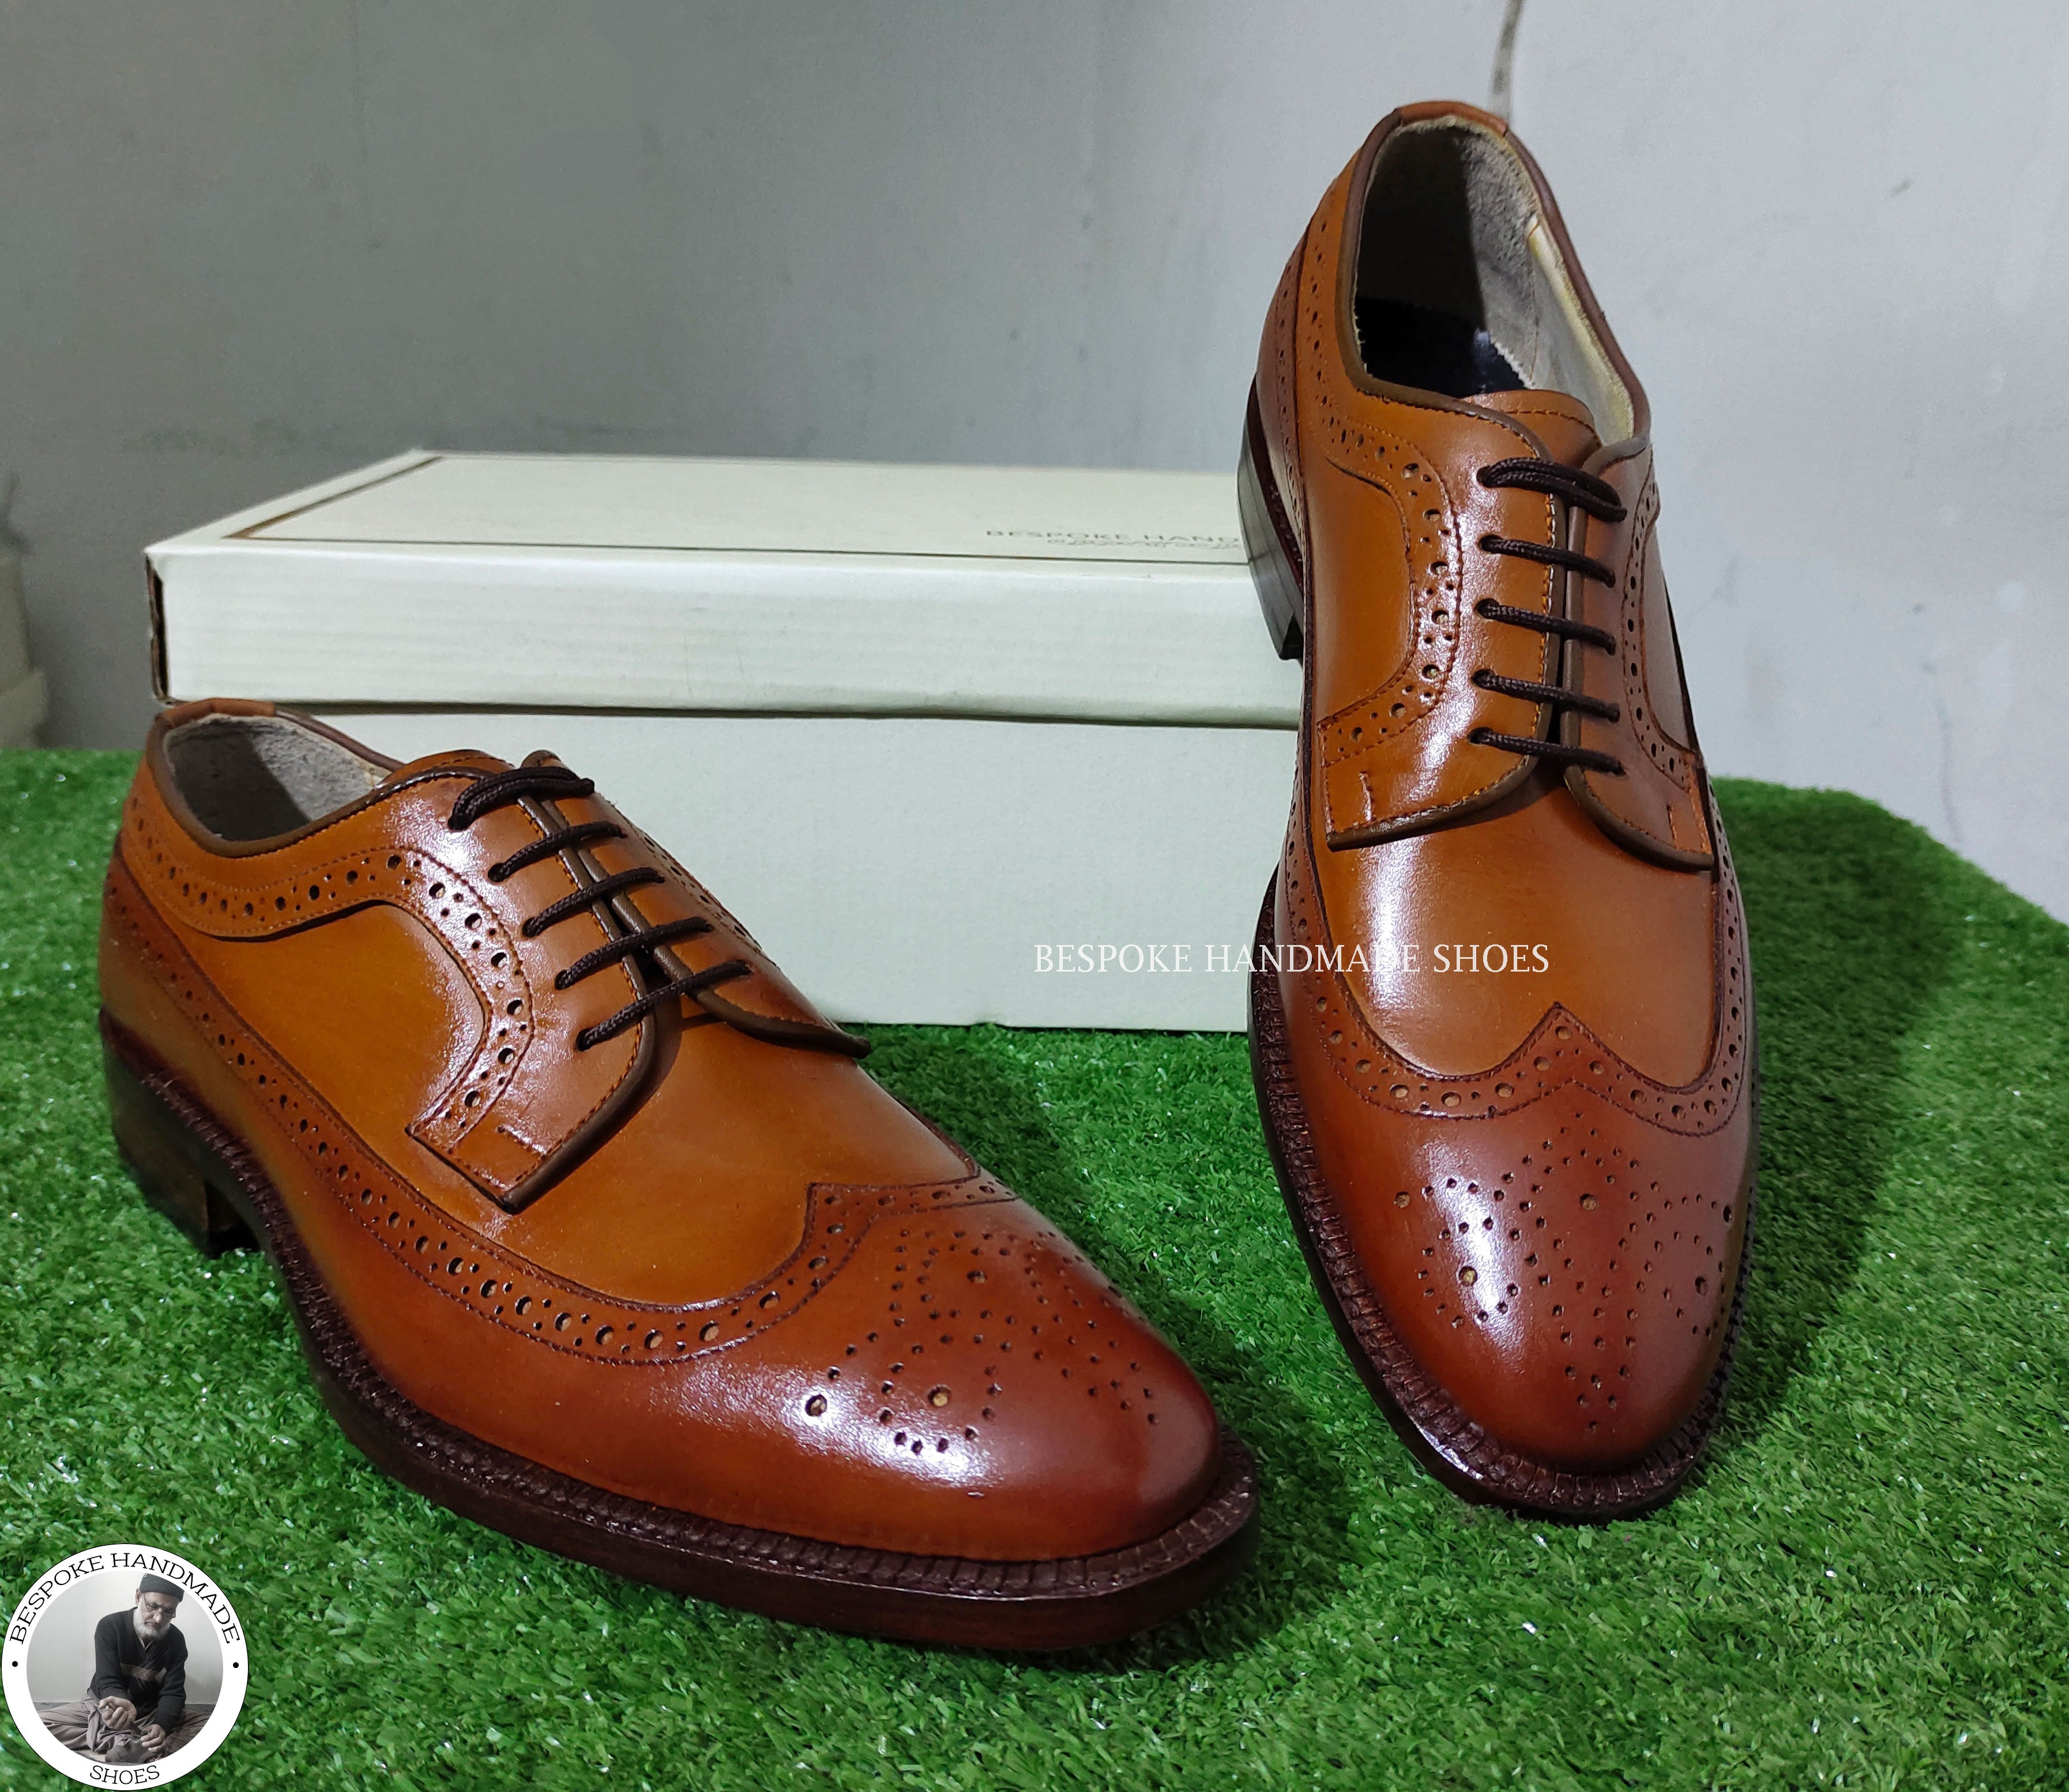 Men's Handmade Custom Made Shoes Brown Leather Oxford Wingtip Brogue Dress Shoes